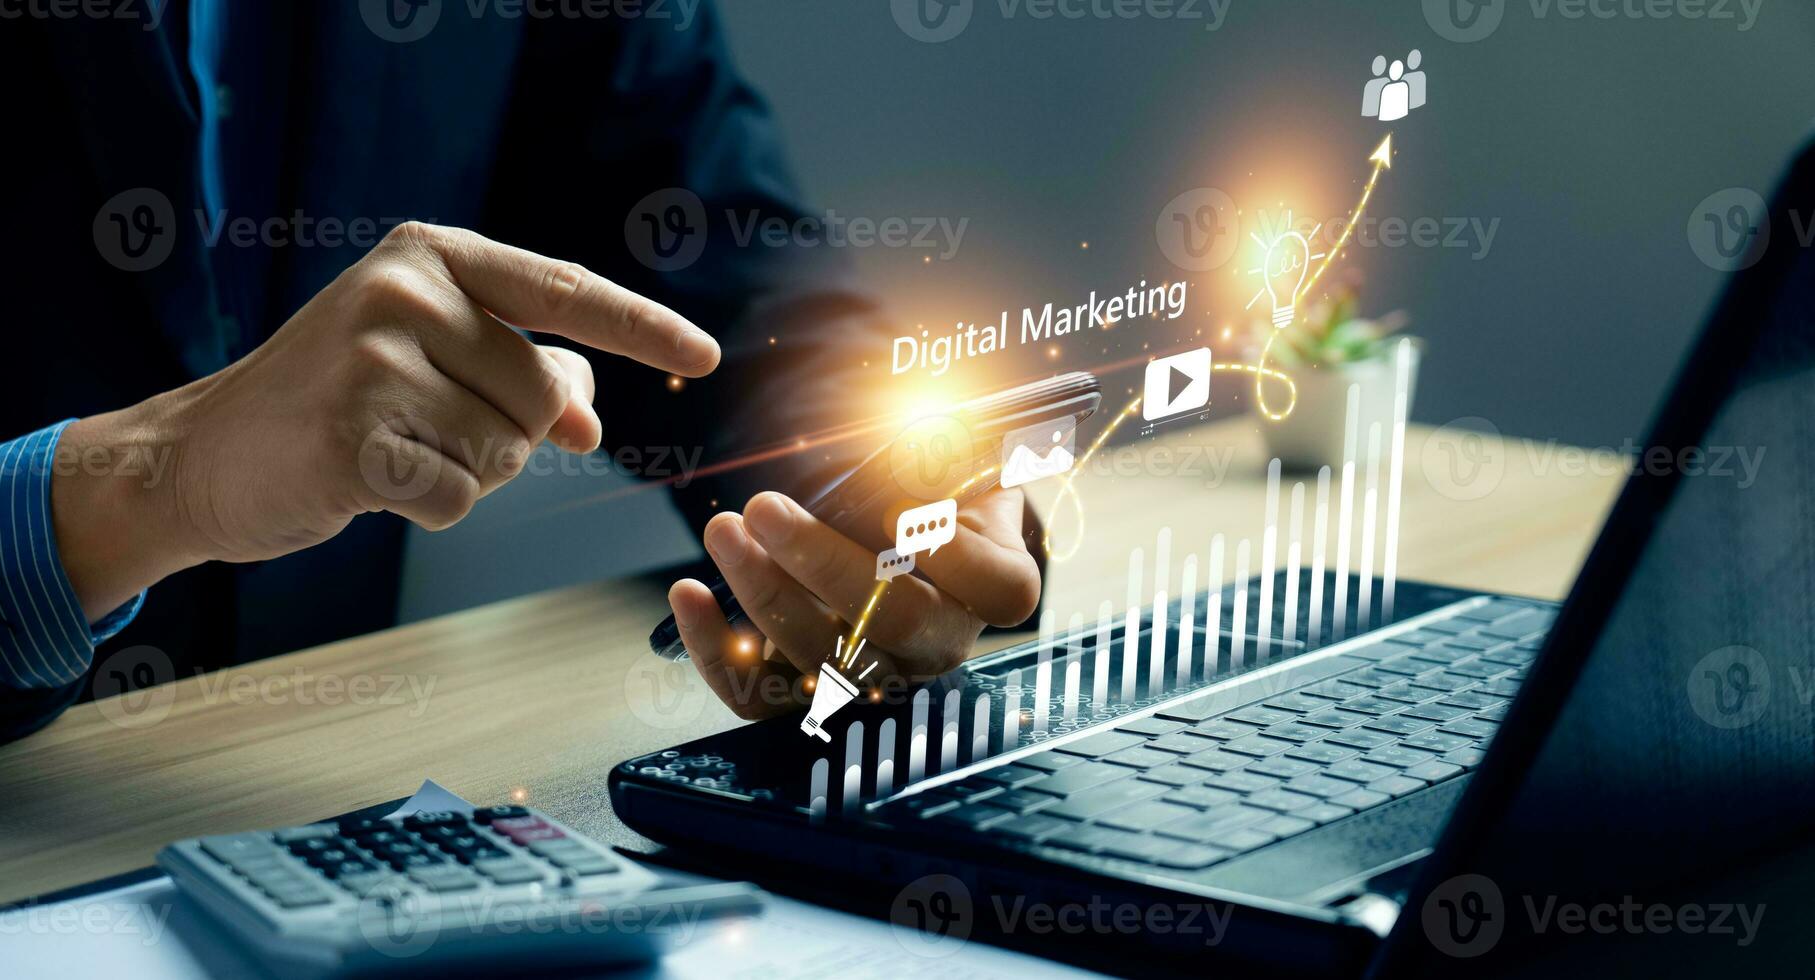 Digital marketing commerce online sale concept, Promotion of products or services through digital channels search engine, social media, email, website, Digital Marketing Strategies and Goals. SEO PPC photo